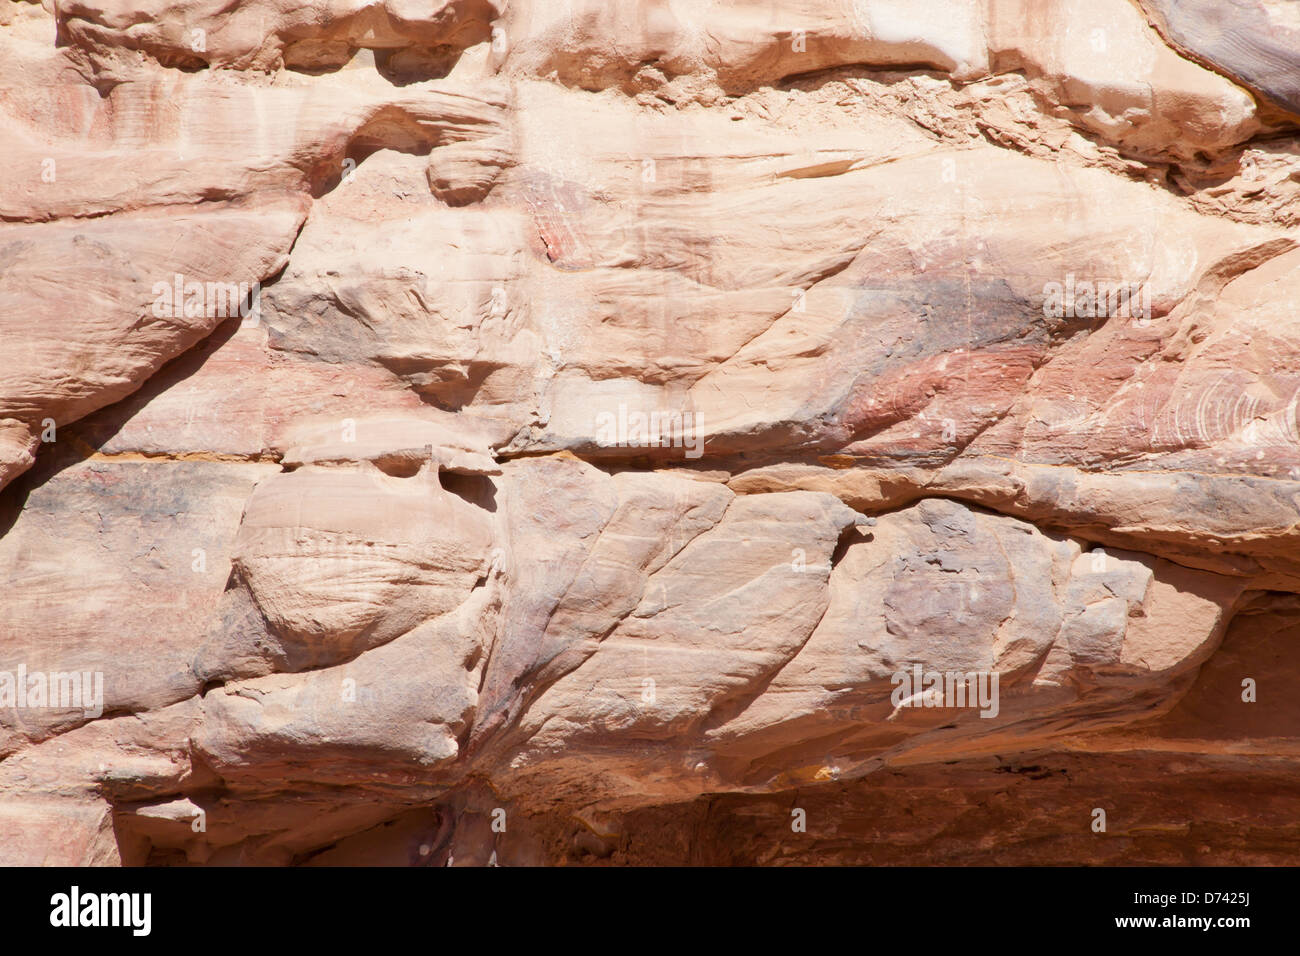 Abstract in pink stone from the first century lost city of Petra, Jordan, for a natural background Stock Photo